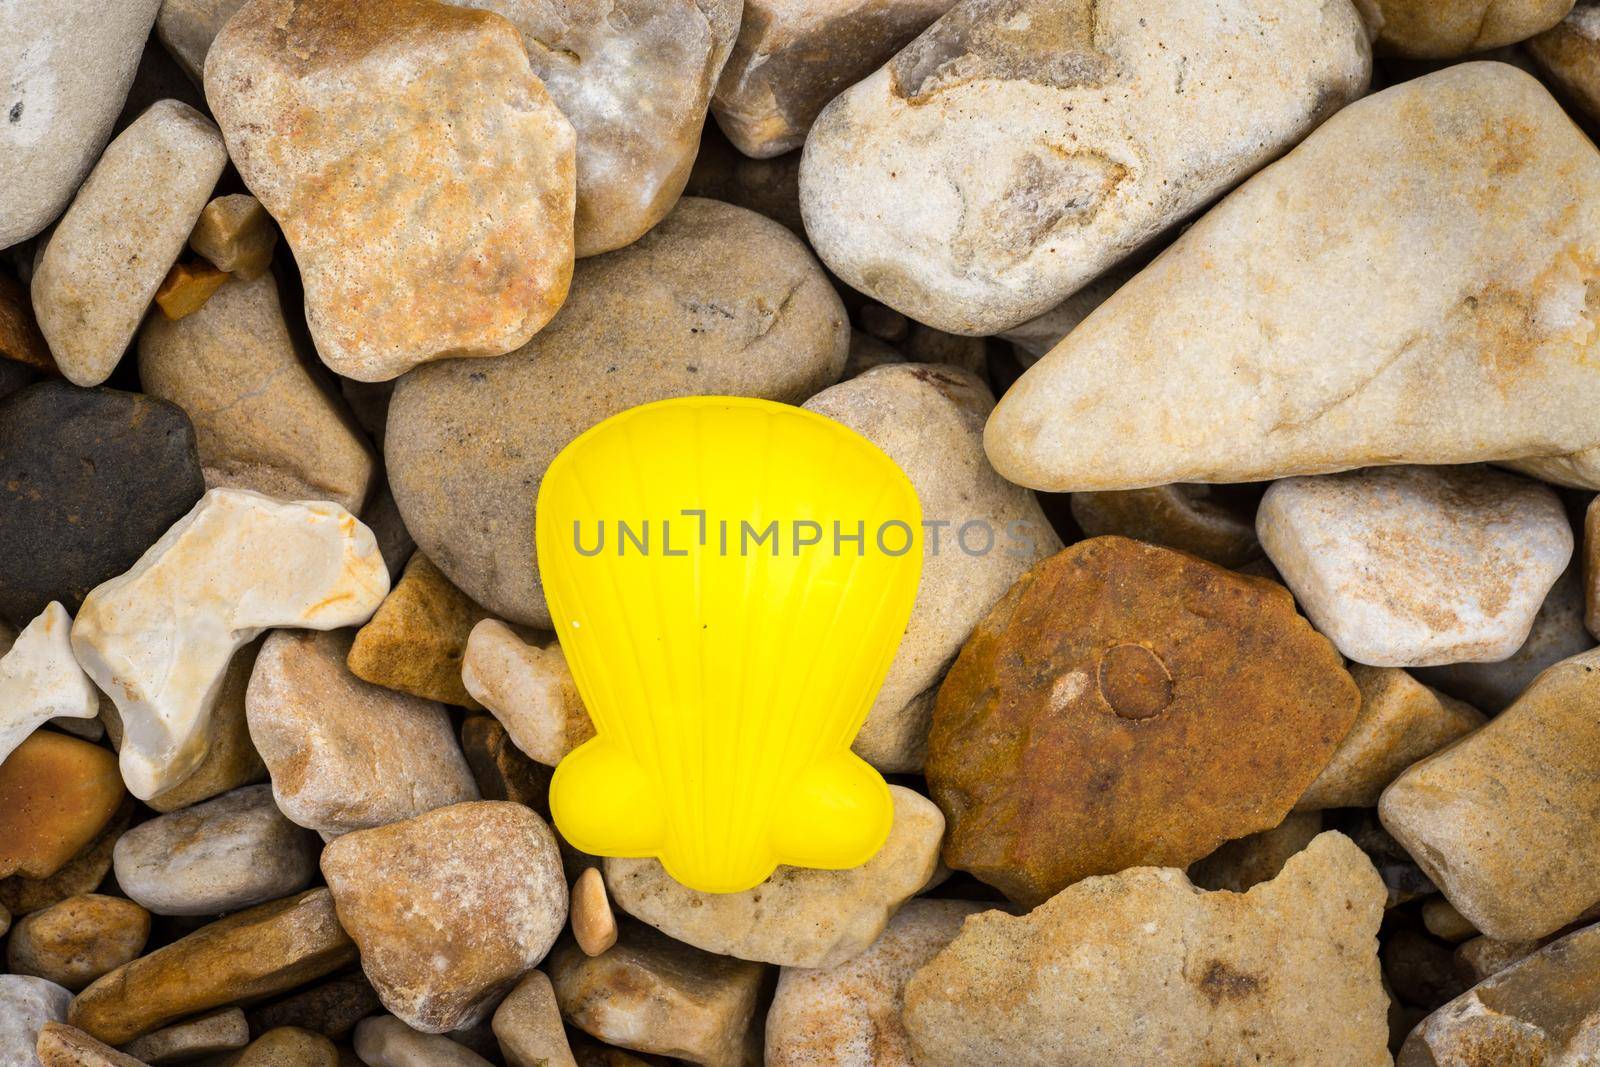 A sand mold in the shape of a shell, yellow, lying on a pebble beach in the South of England